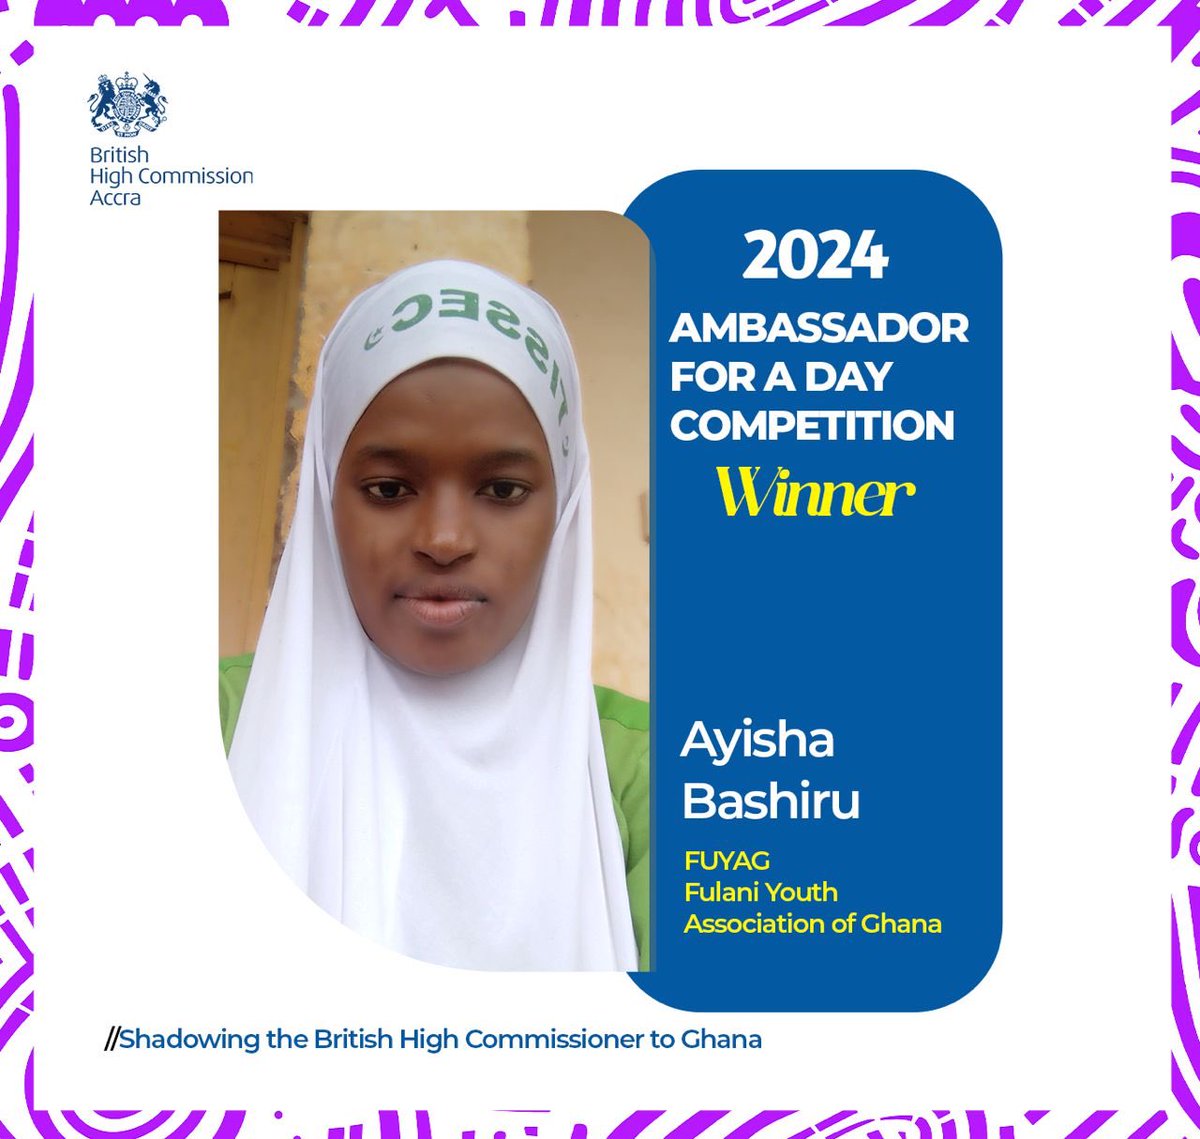 📢 Announcing Ayisha Bashiru as one of our Ambassador for a Day 2024 winners! Excited to spend a day with her: fantastic learning opportunity for me & I hope for her too. Thanks 🇨🇦 & 🇫🇷 for joining me, empowering the next generation of female leaders! #InvestInWomen #AfD2024